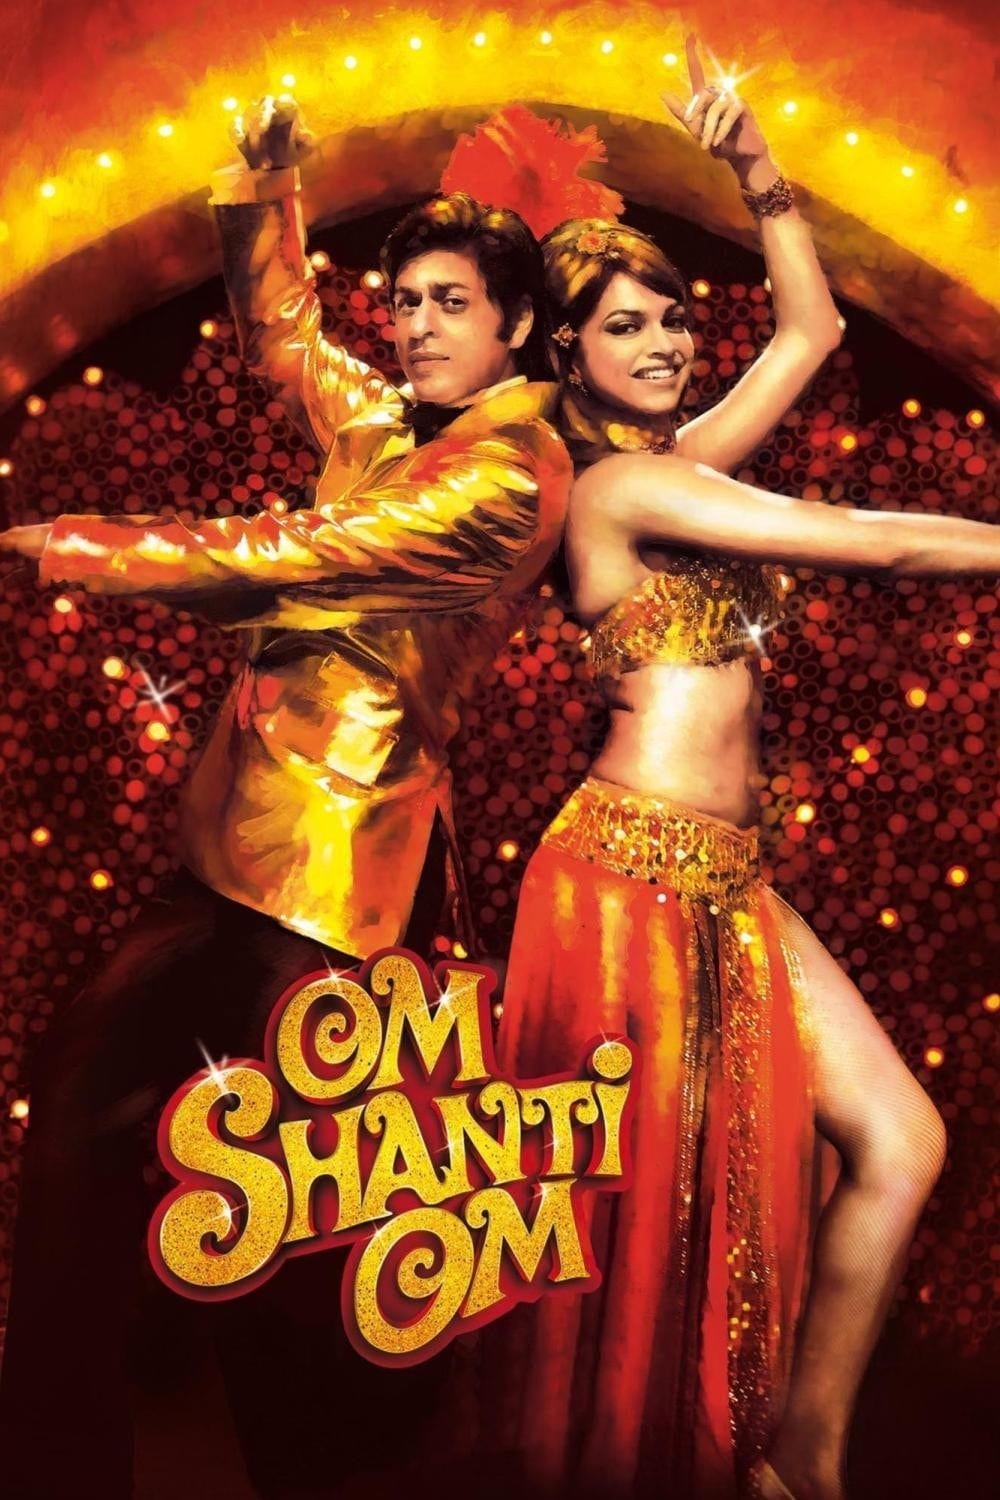 Poster for the movie "Om Shanti Om"